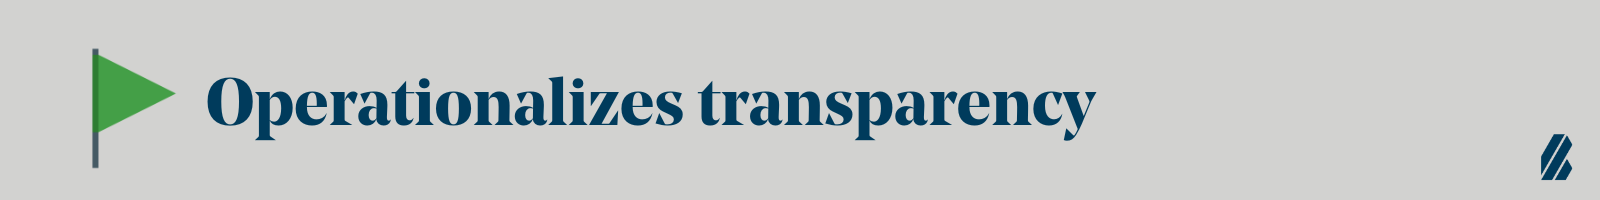 Green flag: operationalizes transparency